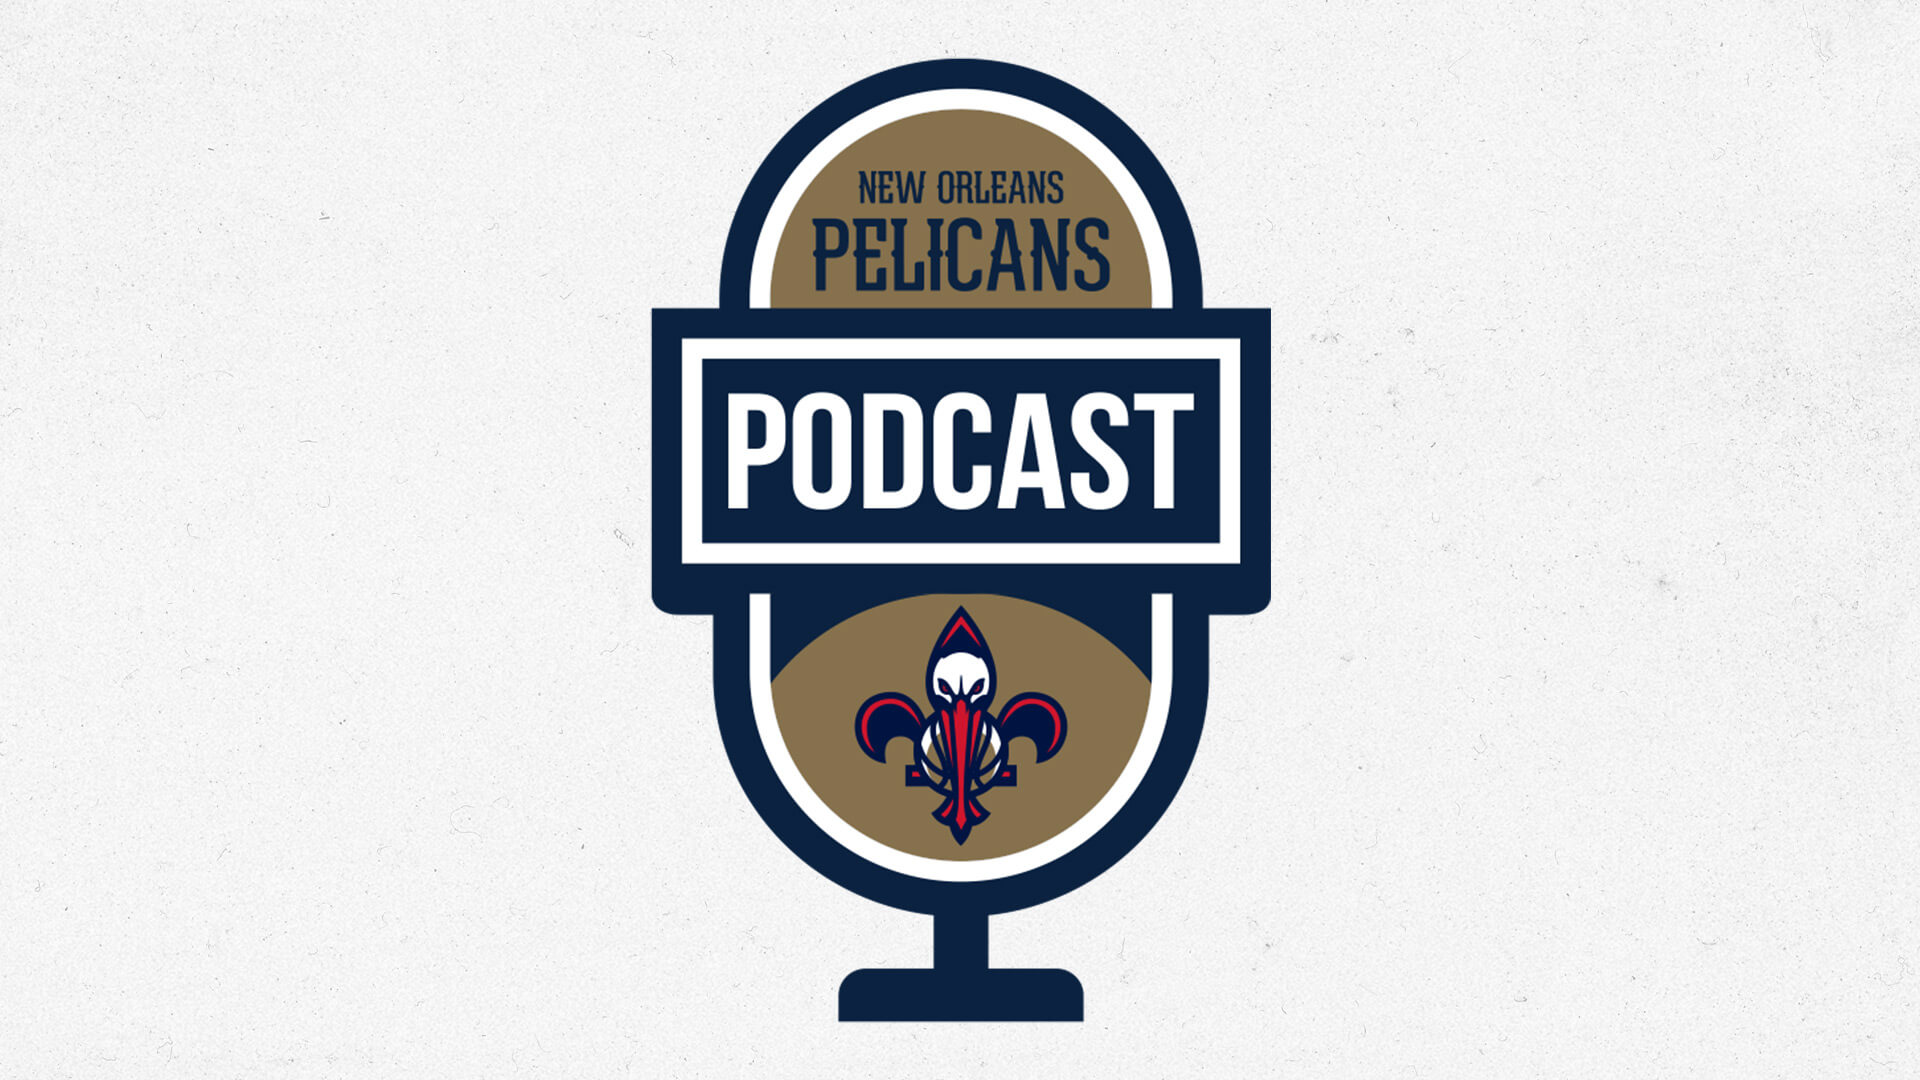 Derek Harper on the New Orleans Pelicans podcast presented by SeatGeek - May 12, 2021